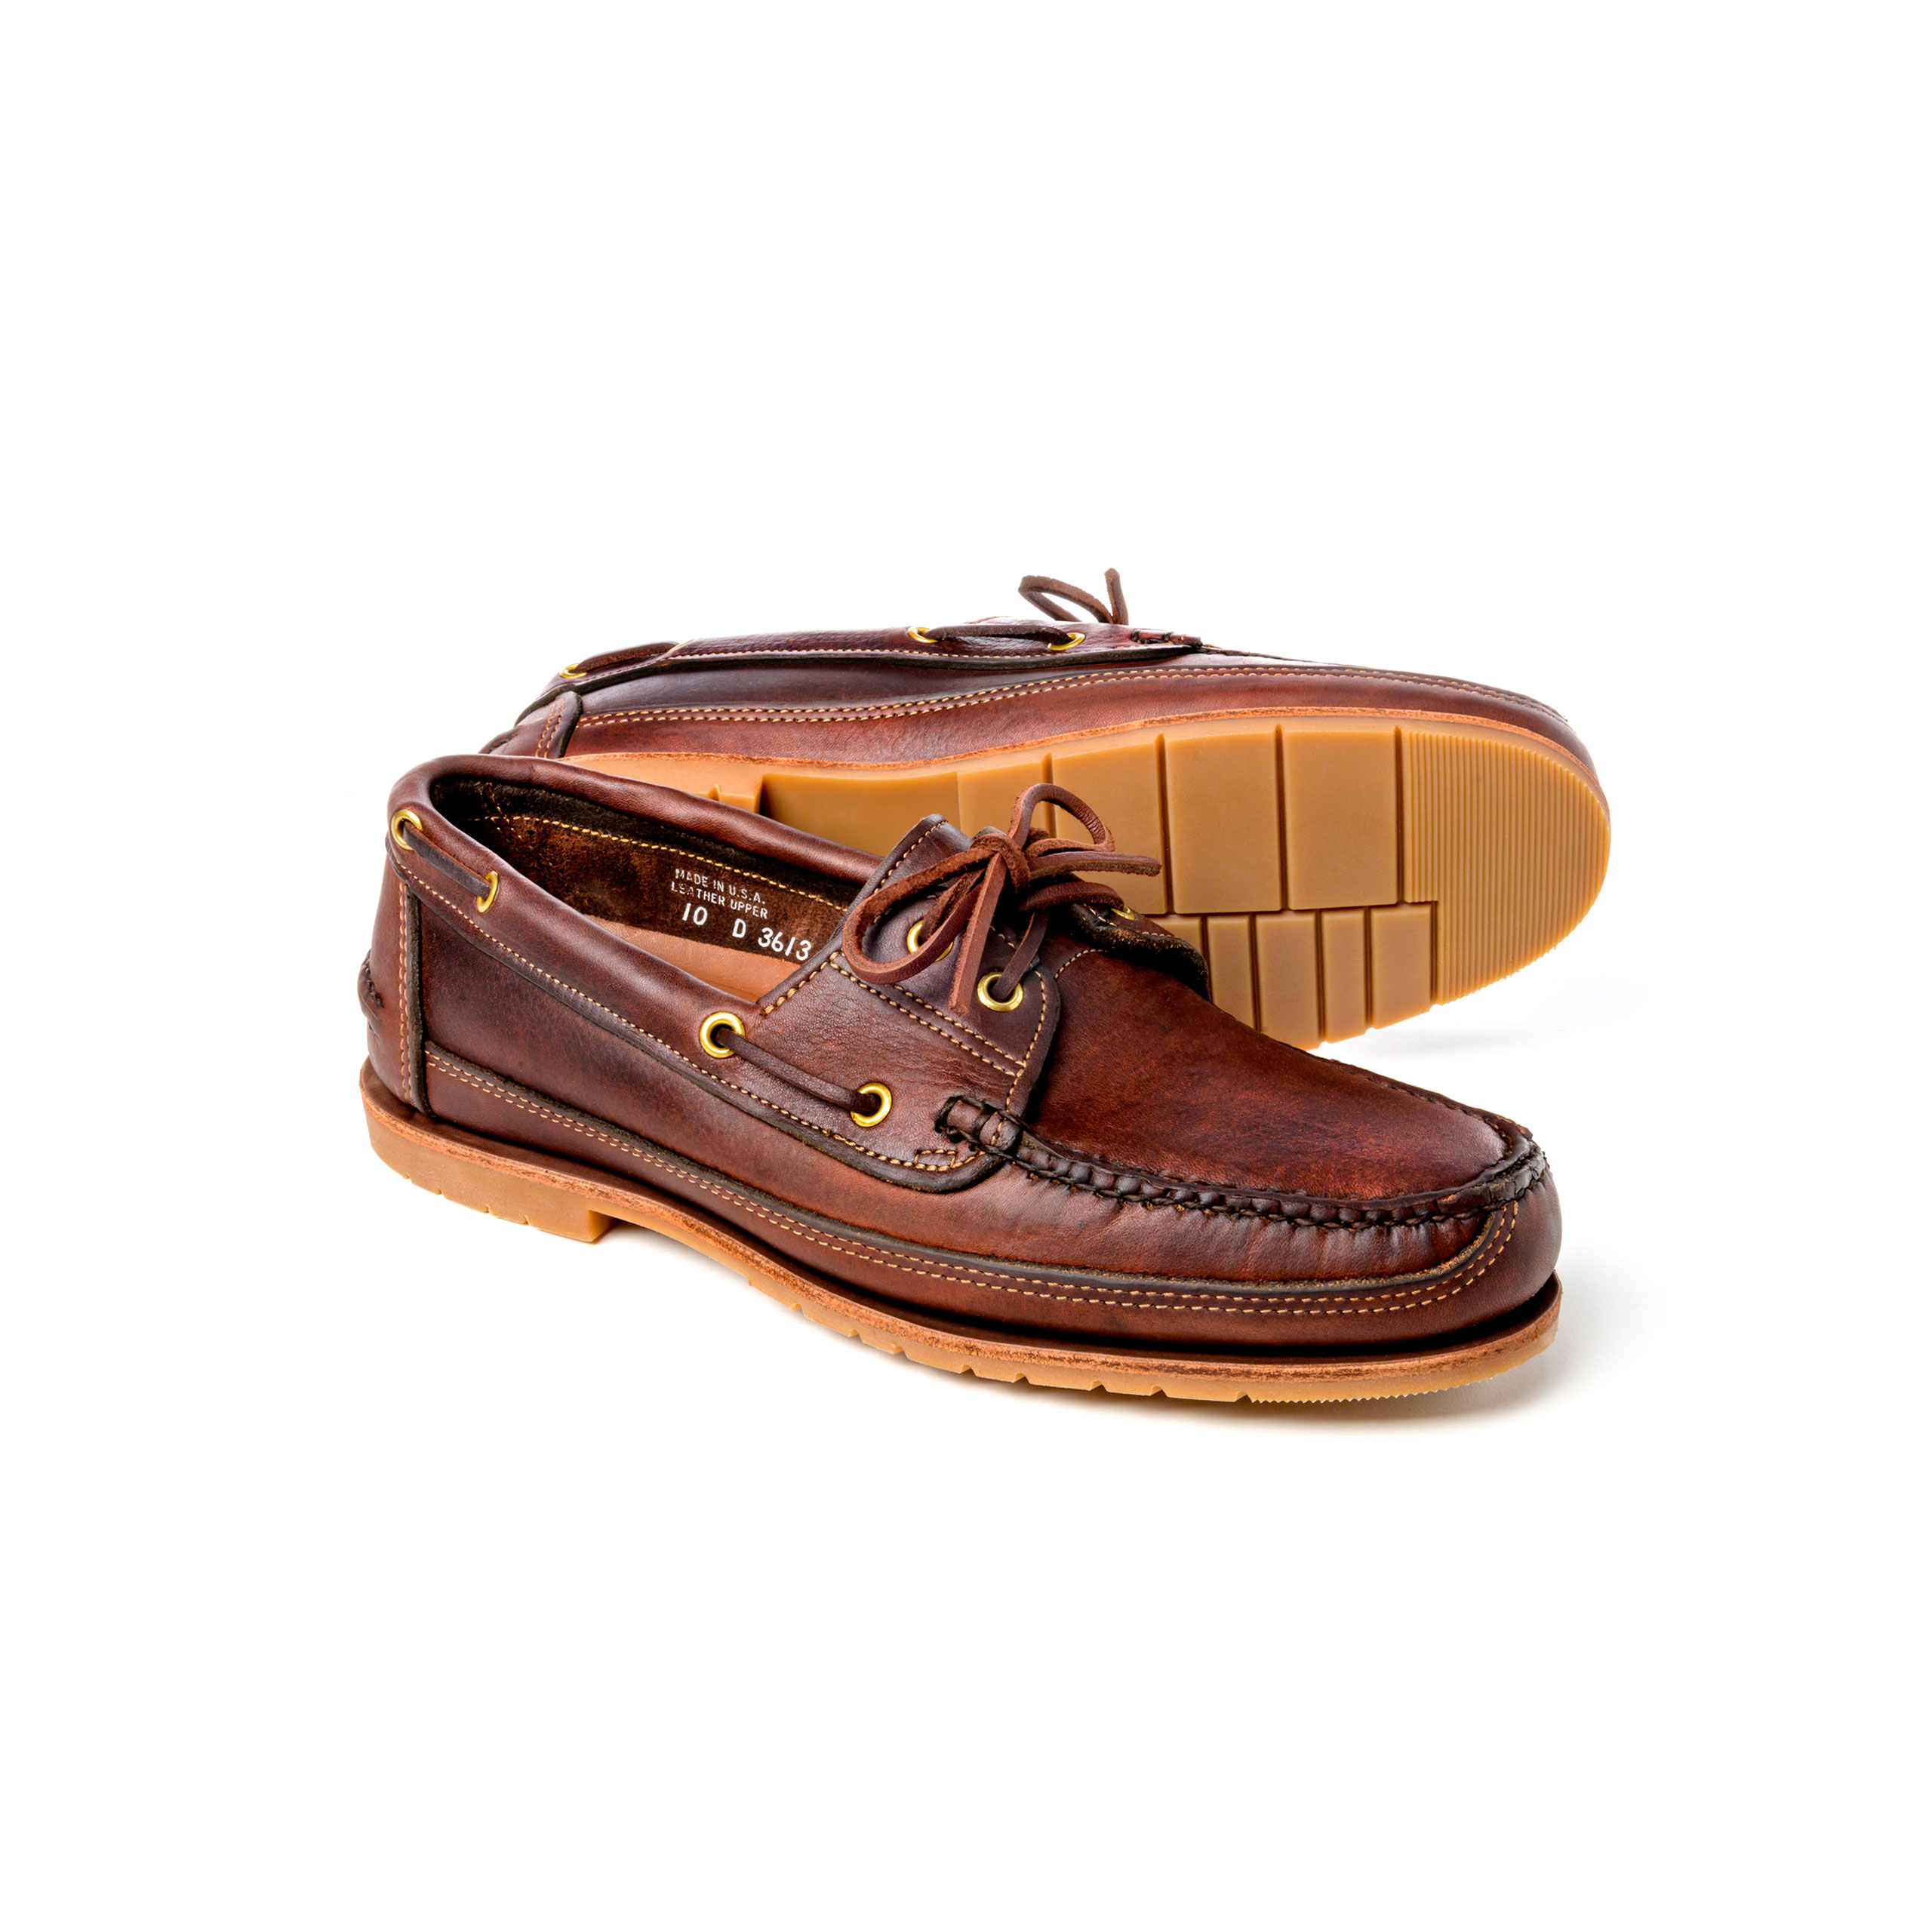 all leather boat shoes